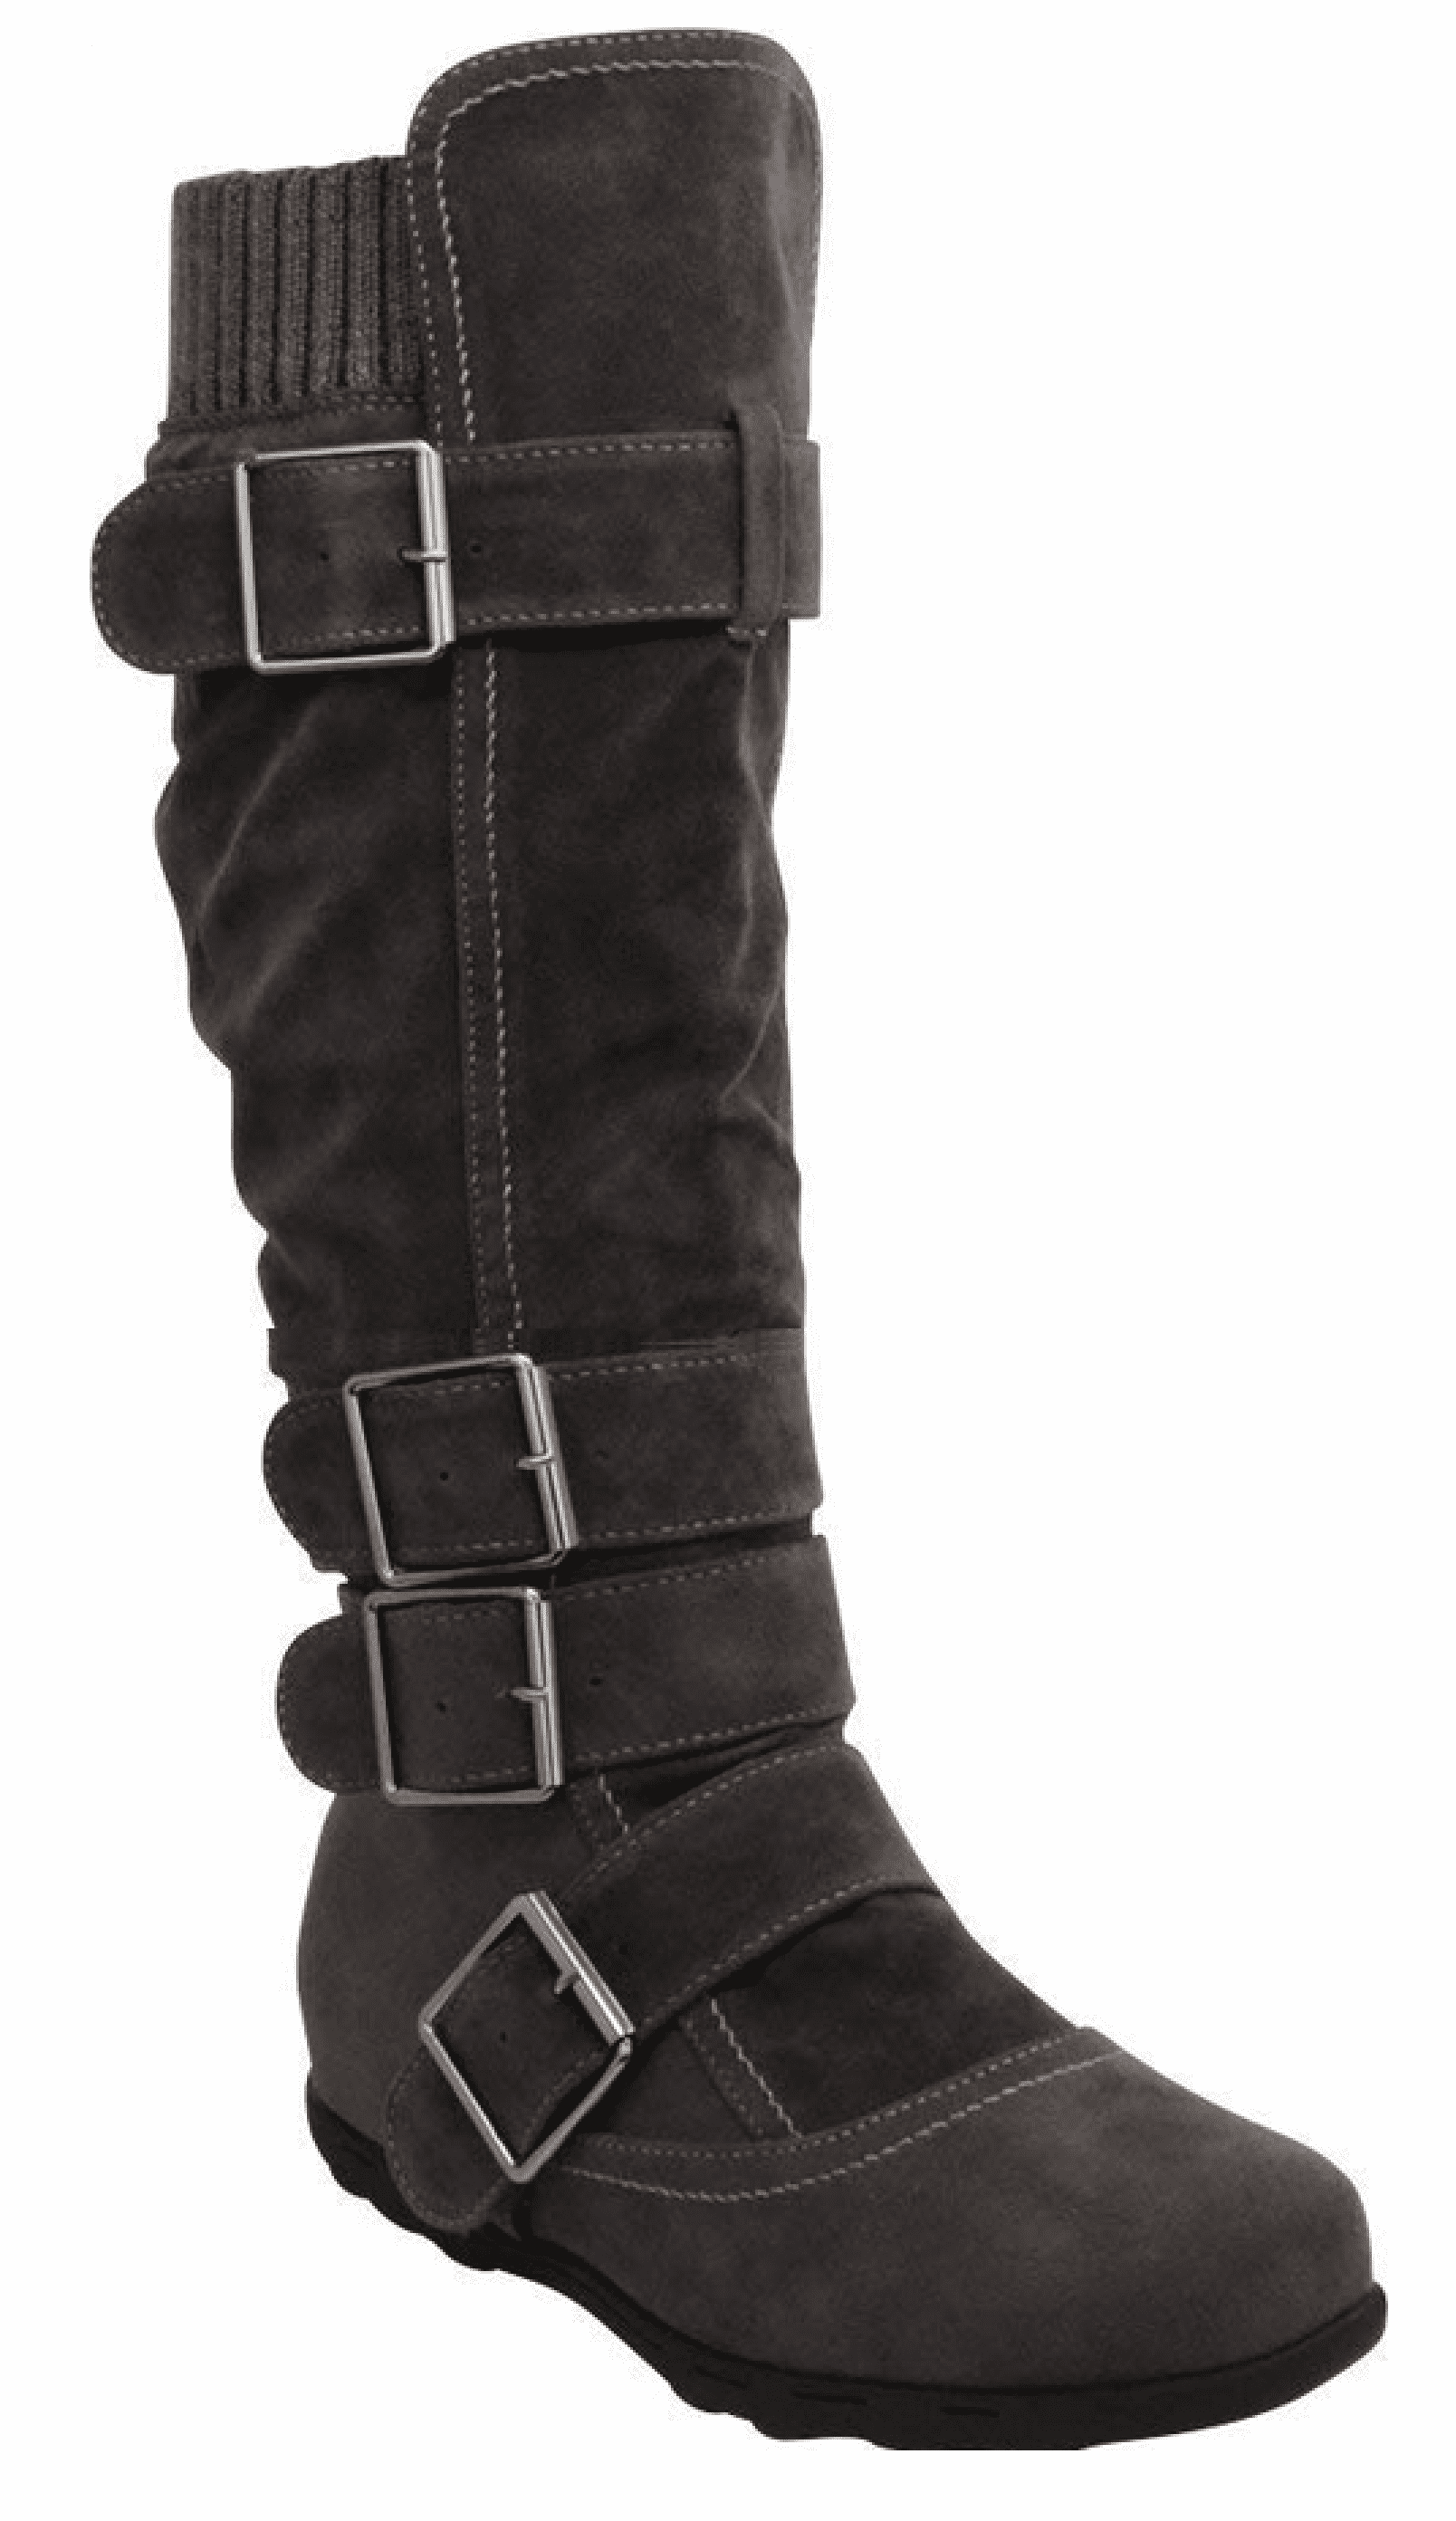 D and H - Women's Knee High Mid Calf Boots Ruched Suede Slouch Knitted ...